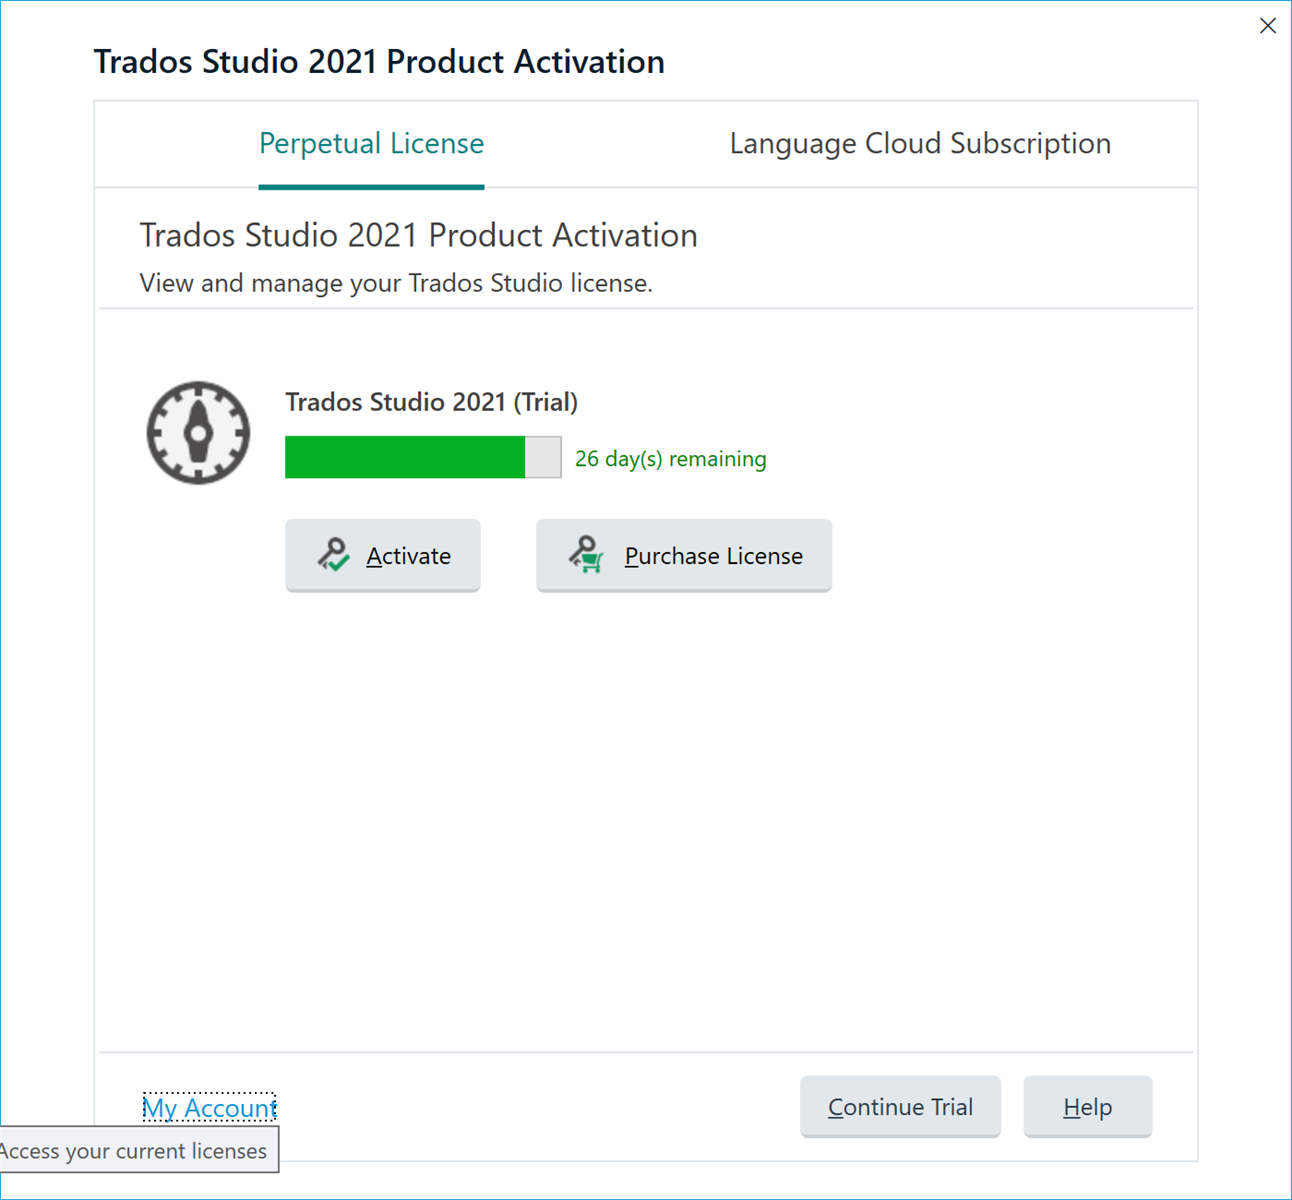 Trados Studio 2021 Product Activation window showing a trial version with 26 days remaining, with options to activate or purchase a license.